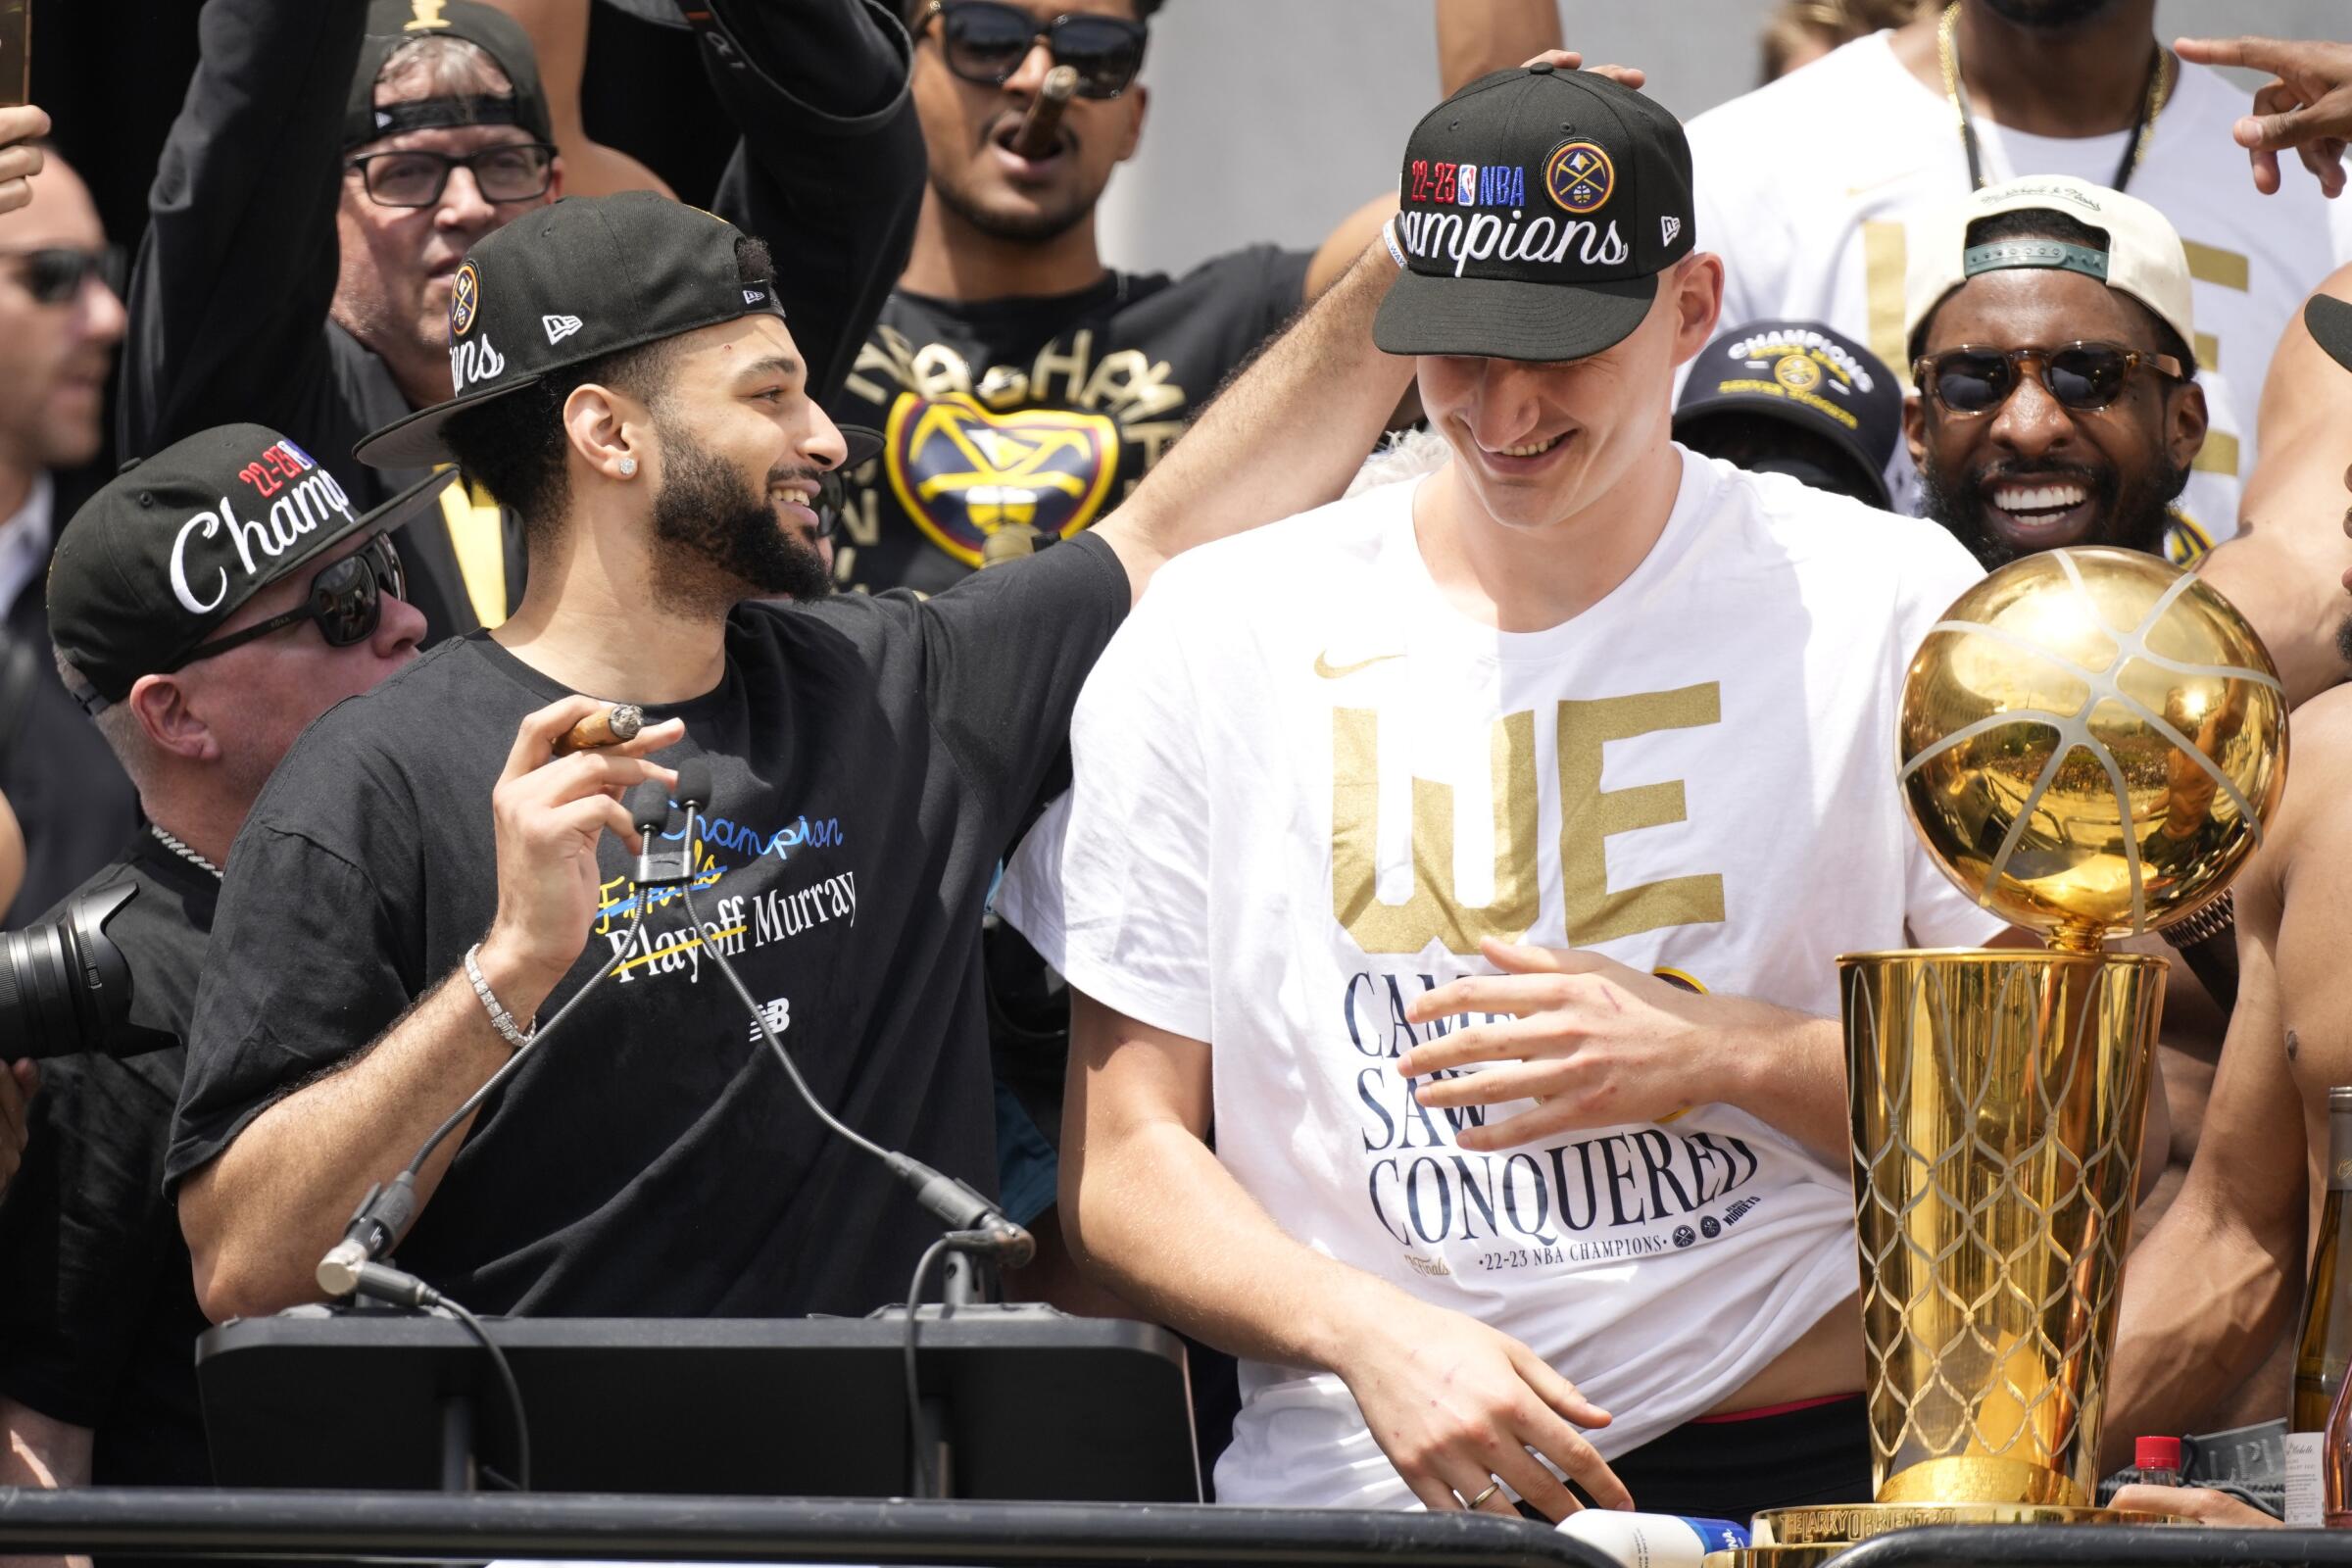 Lakers and Dodgers Fans Take In Historic Championship Run